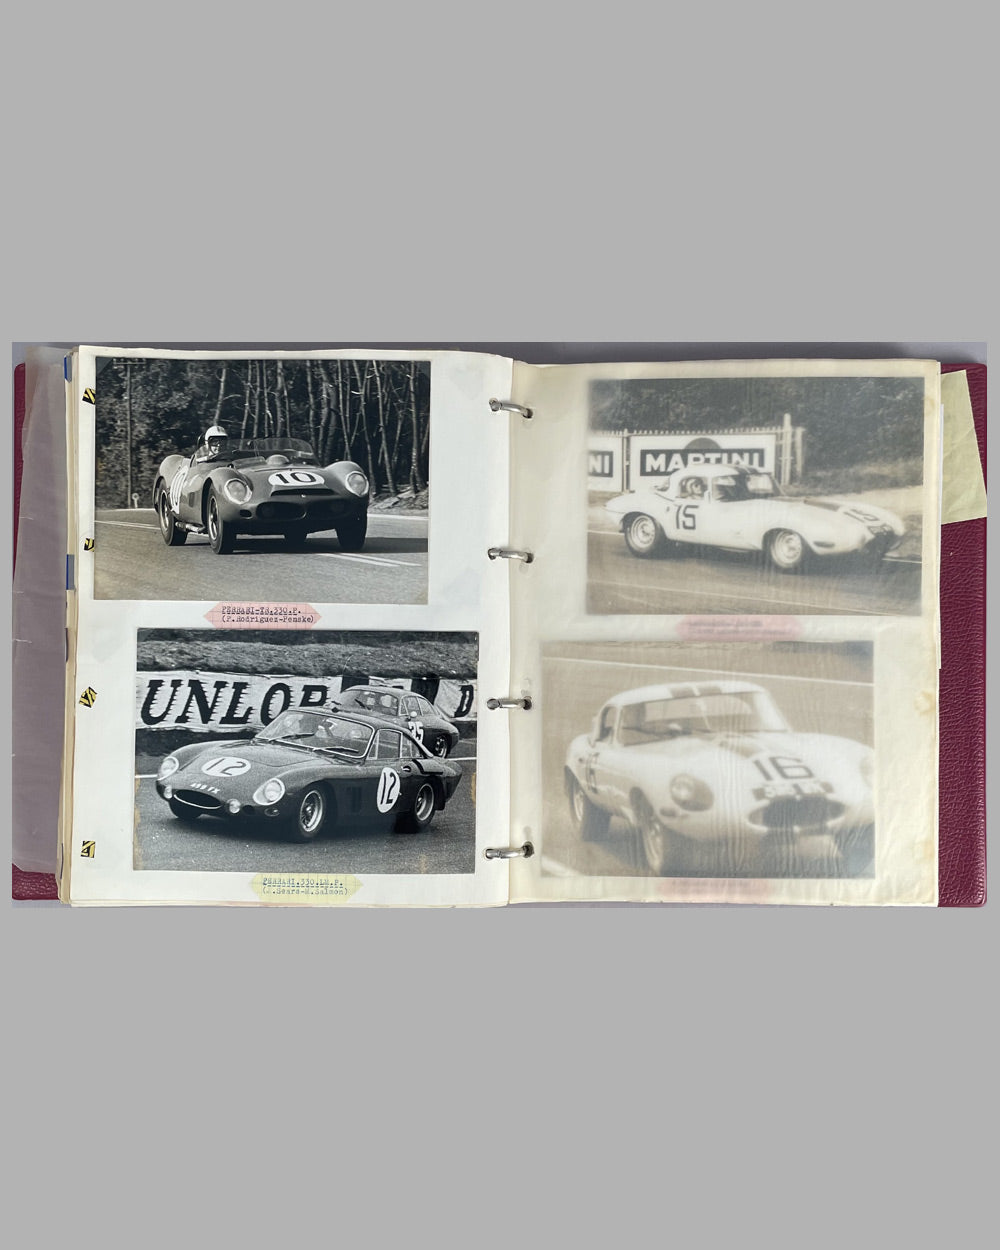 24 hours of Le Mans photo album for 1956 to 1965